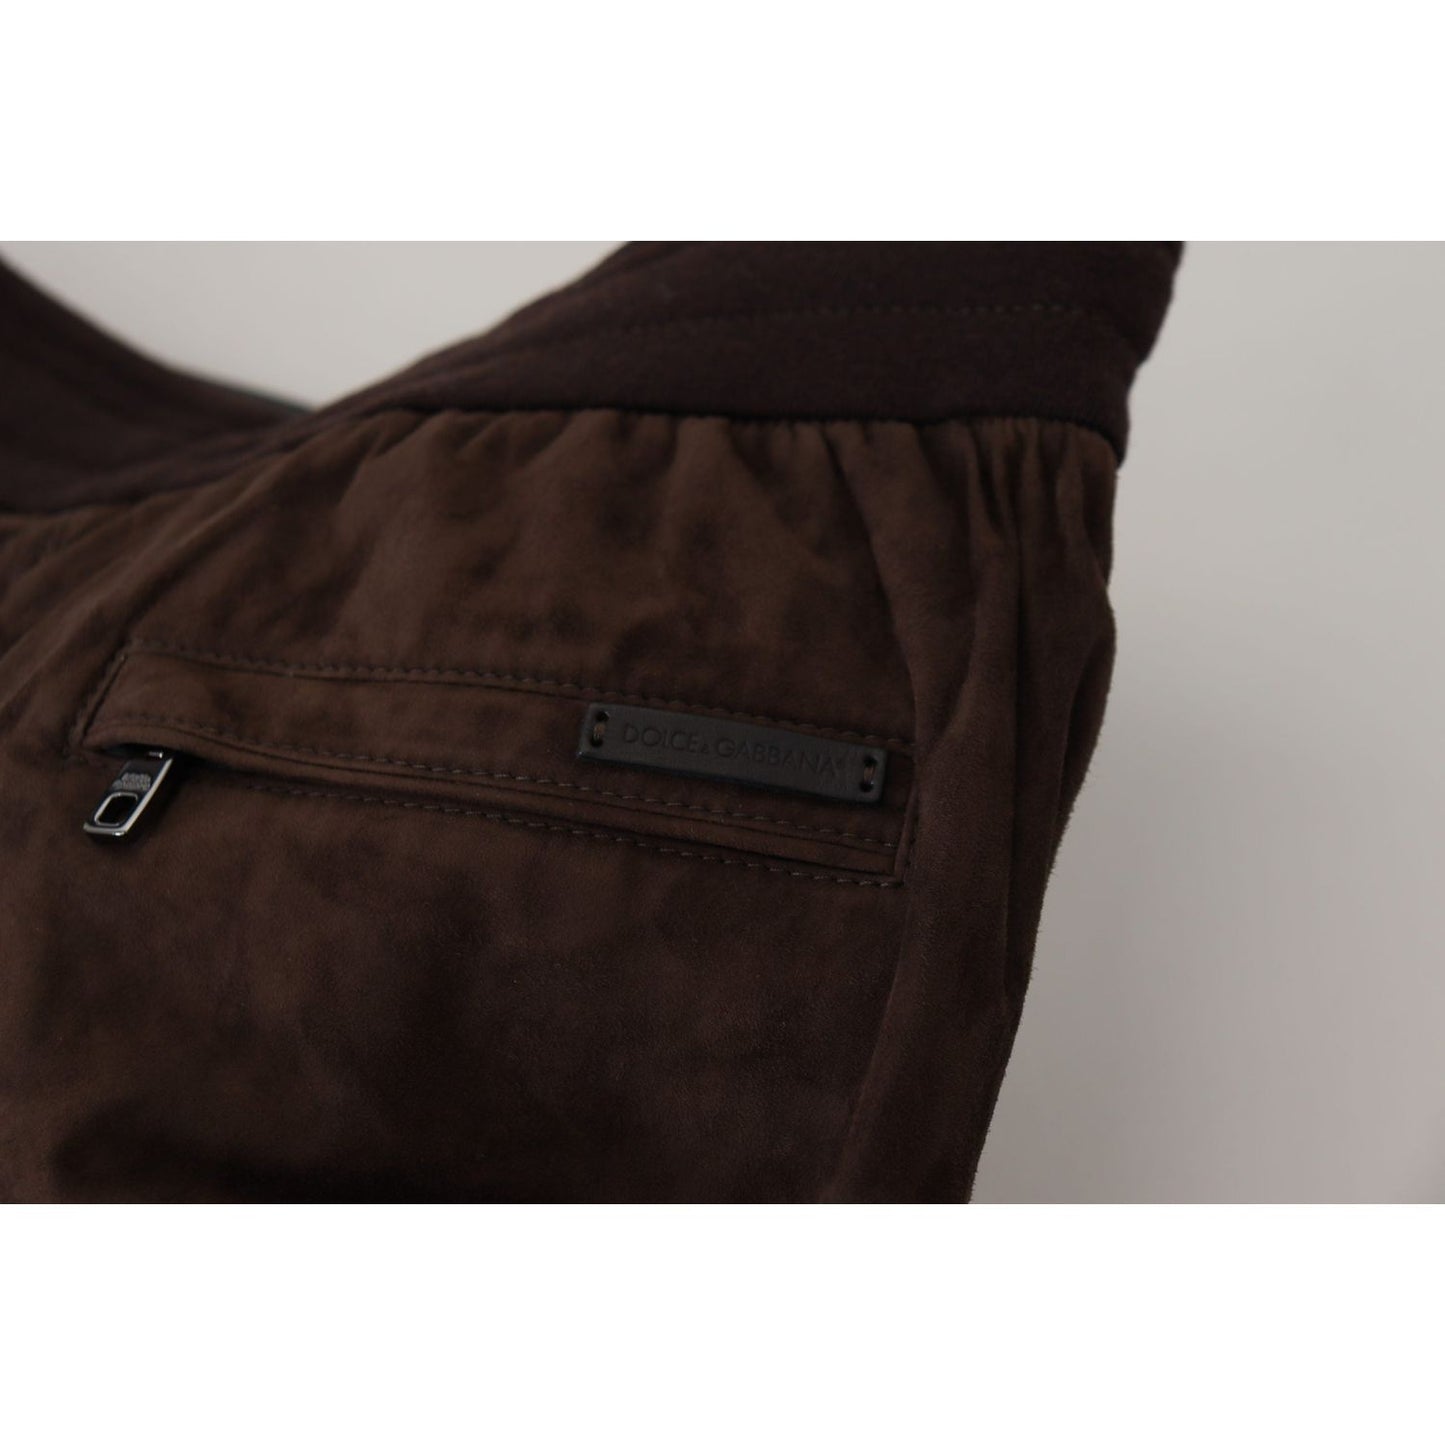 Dolce & Gabbana Stunning Authentic Jogger Pants in Brown brown-solid-men-drawstring-jogger-pants